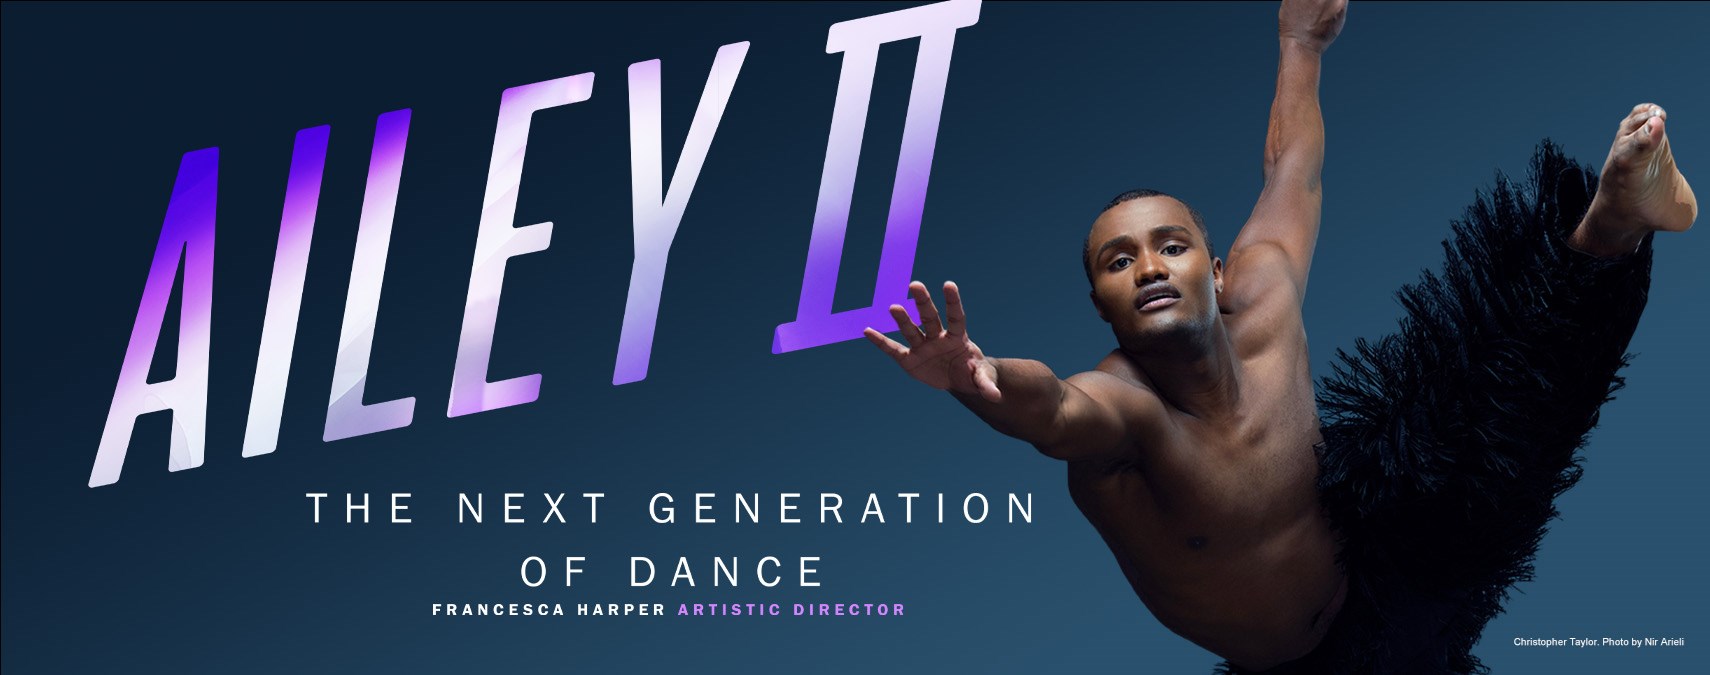 Ailey II -February 21, 2023 at 7:30 p.m.